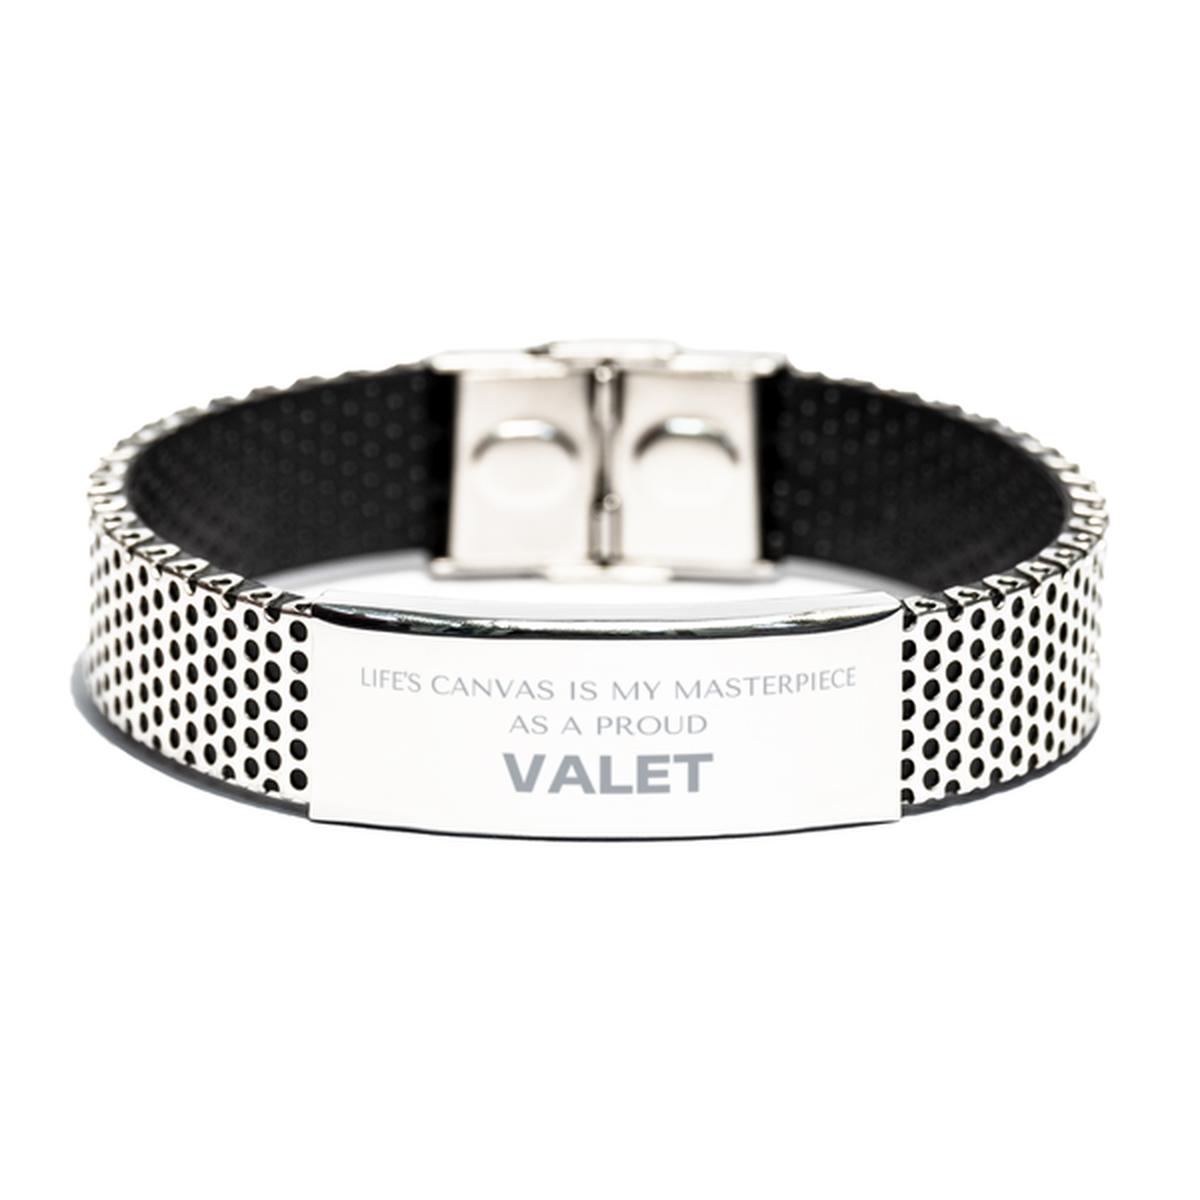 Proud Valet Gifts, Life's canvas is my masterpiece, Epic Birthday Christmas Unique Stainless Steel Bracelet For Valet, Coworkers, Men, Women, Friends